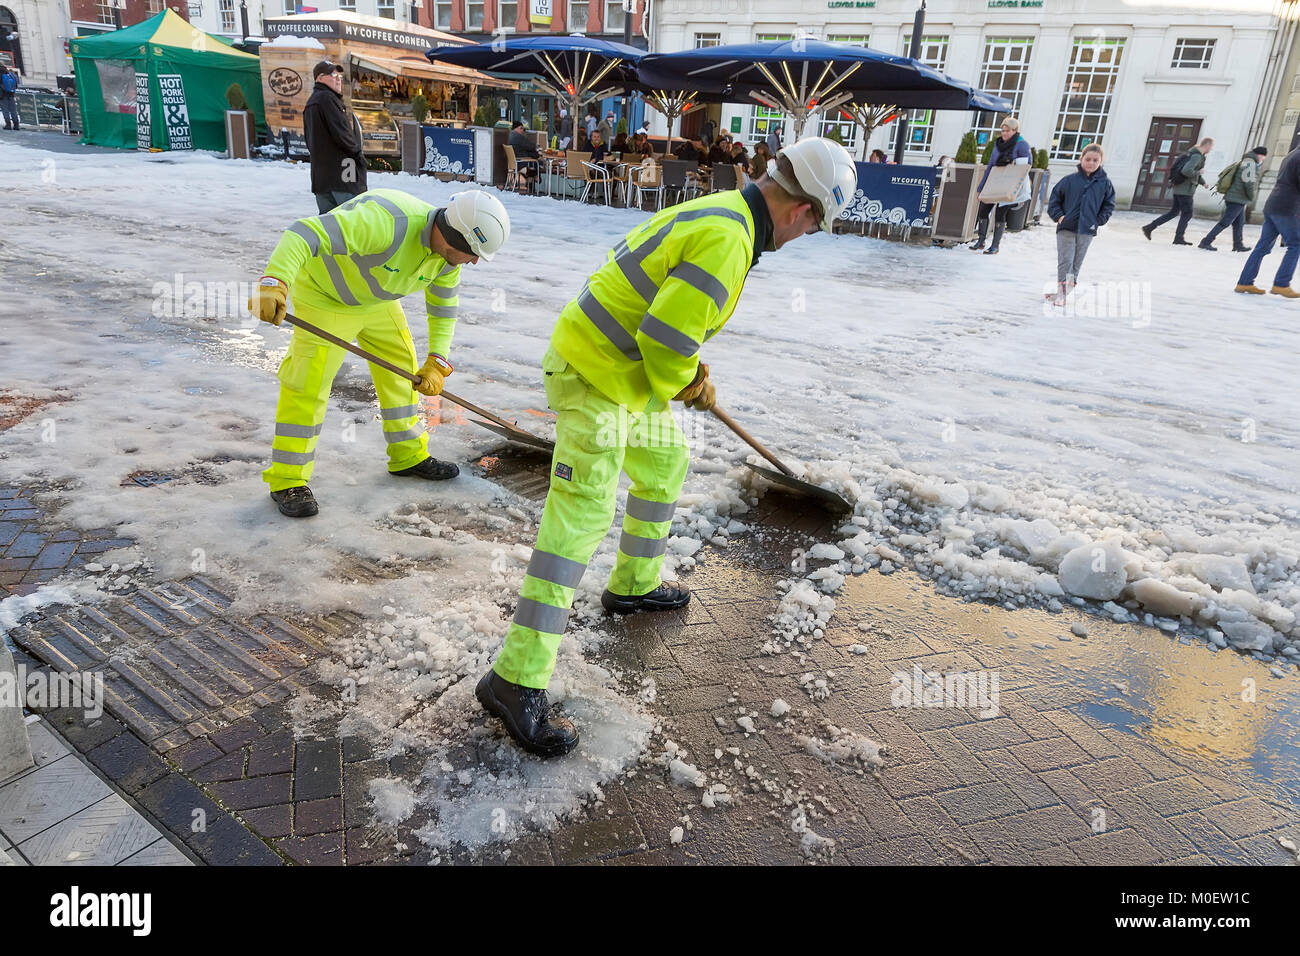 Workmen clearing snow from shopping centre street, Hereford, UK Stock Photo